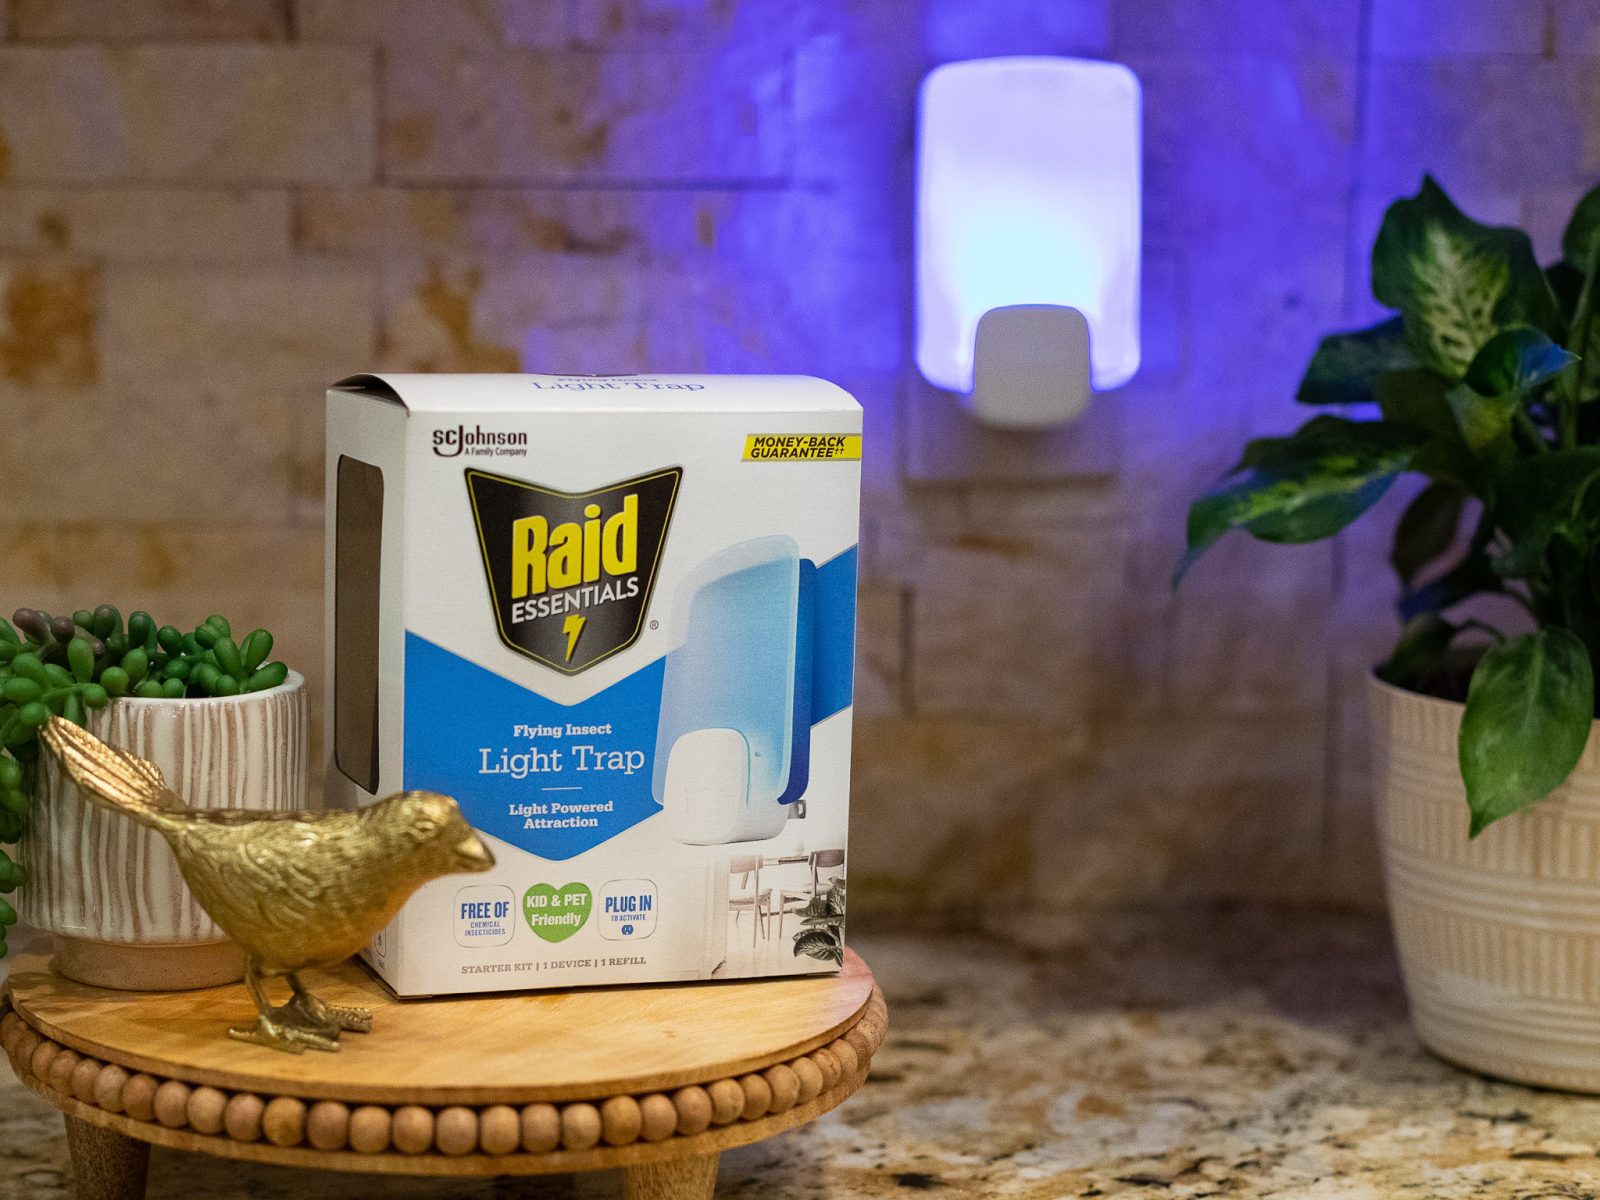 Get Insecticide-Free Protection With Raid® Essentials Light Trap – Save BIG At Publix